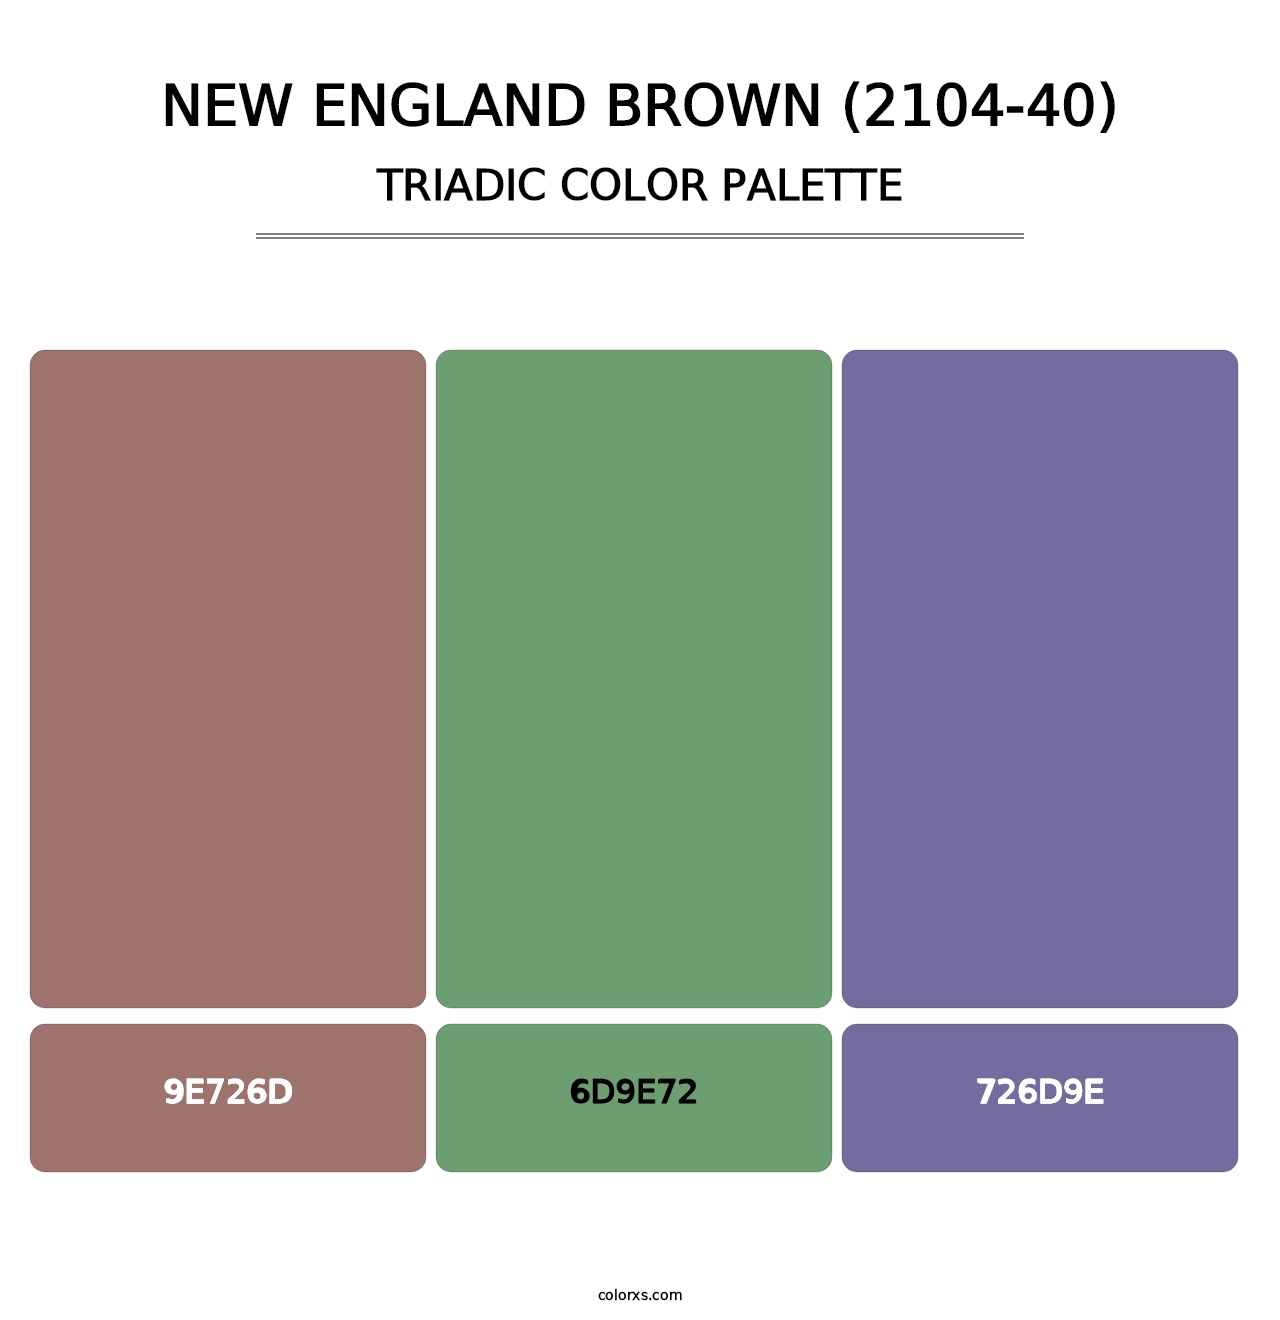 New England Brown (2104-40) - Triadic Color Palette